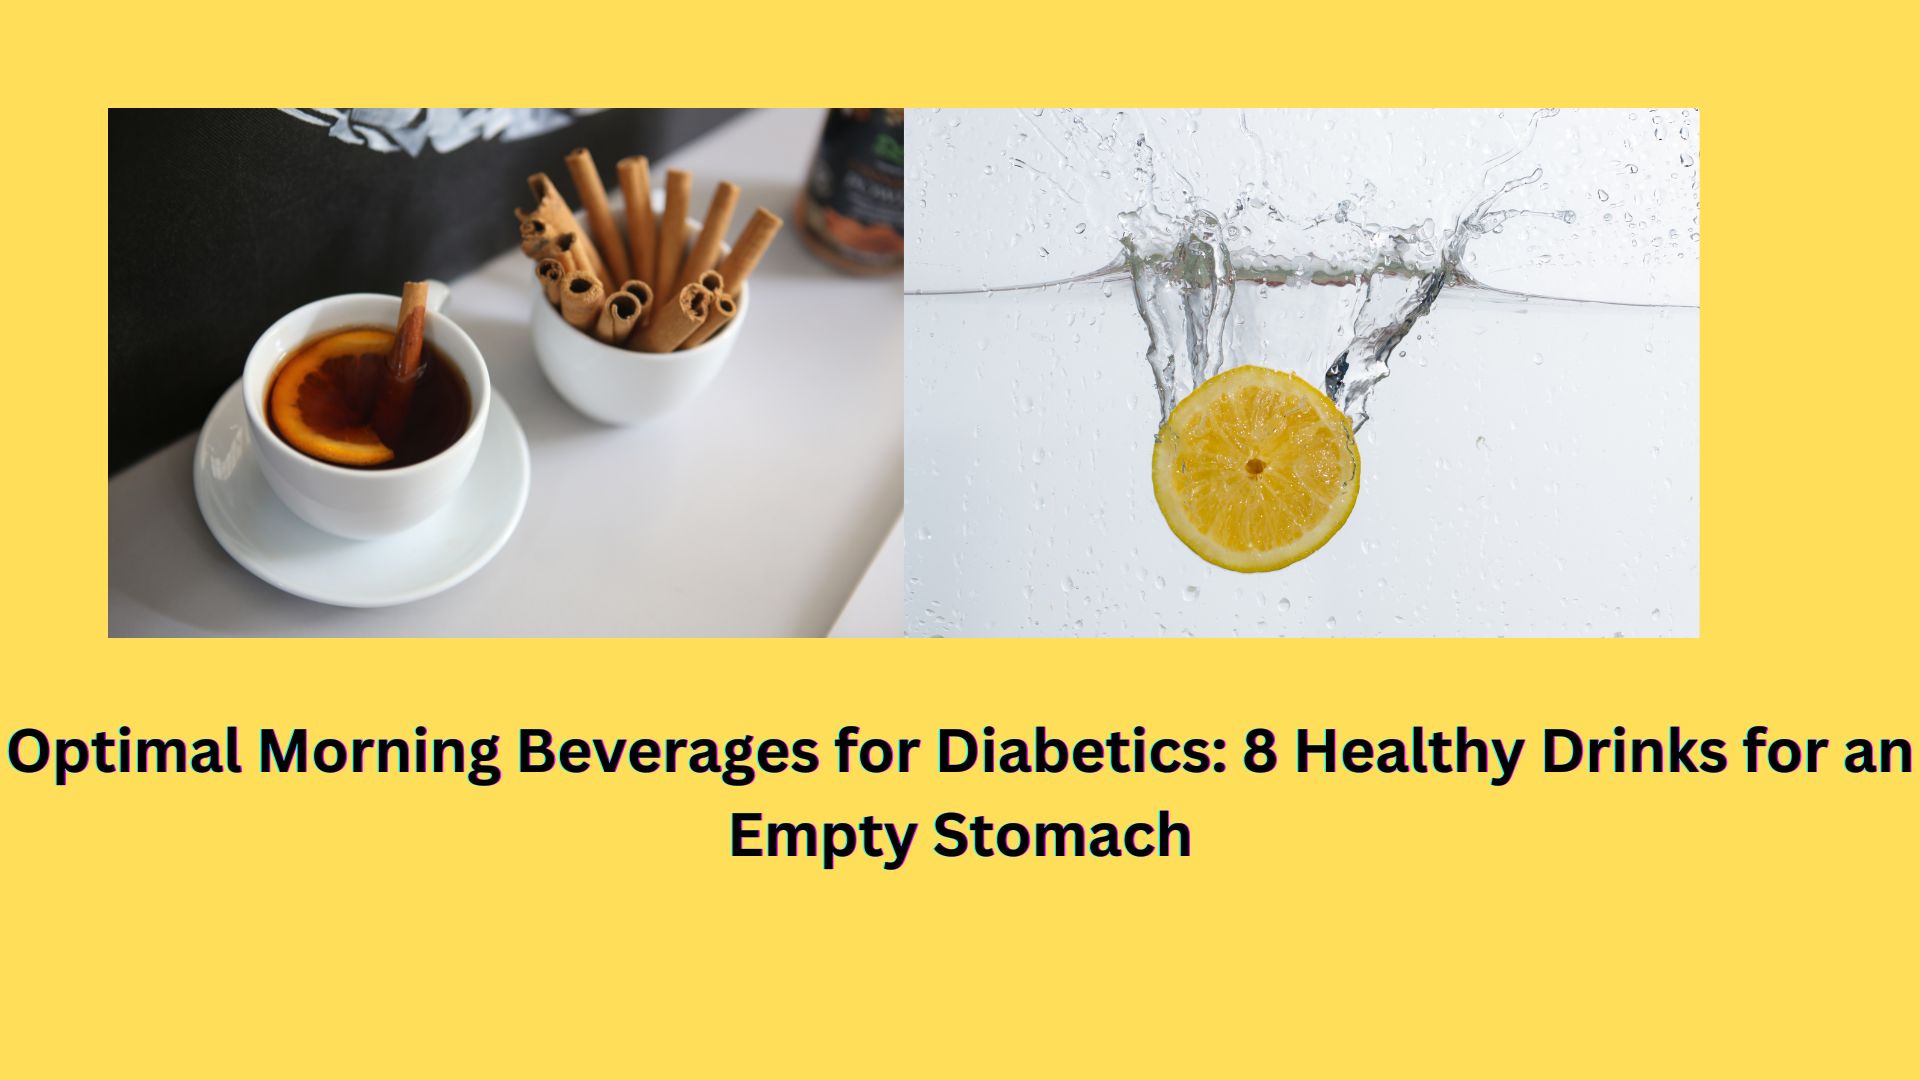 Optimal Morning Beverages for Diabetics: 8 Healthy Drinks for an Empty Stomach